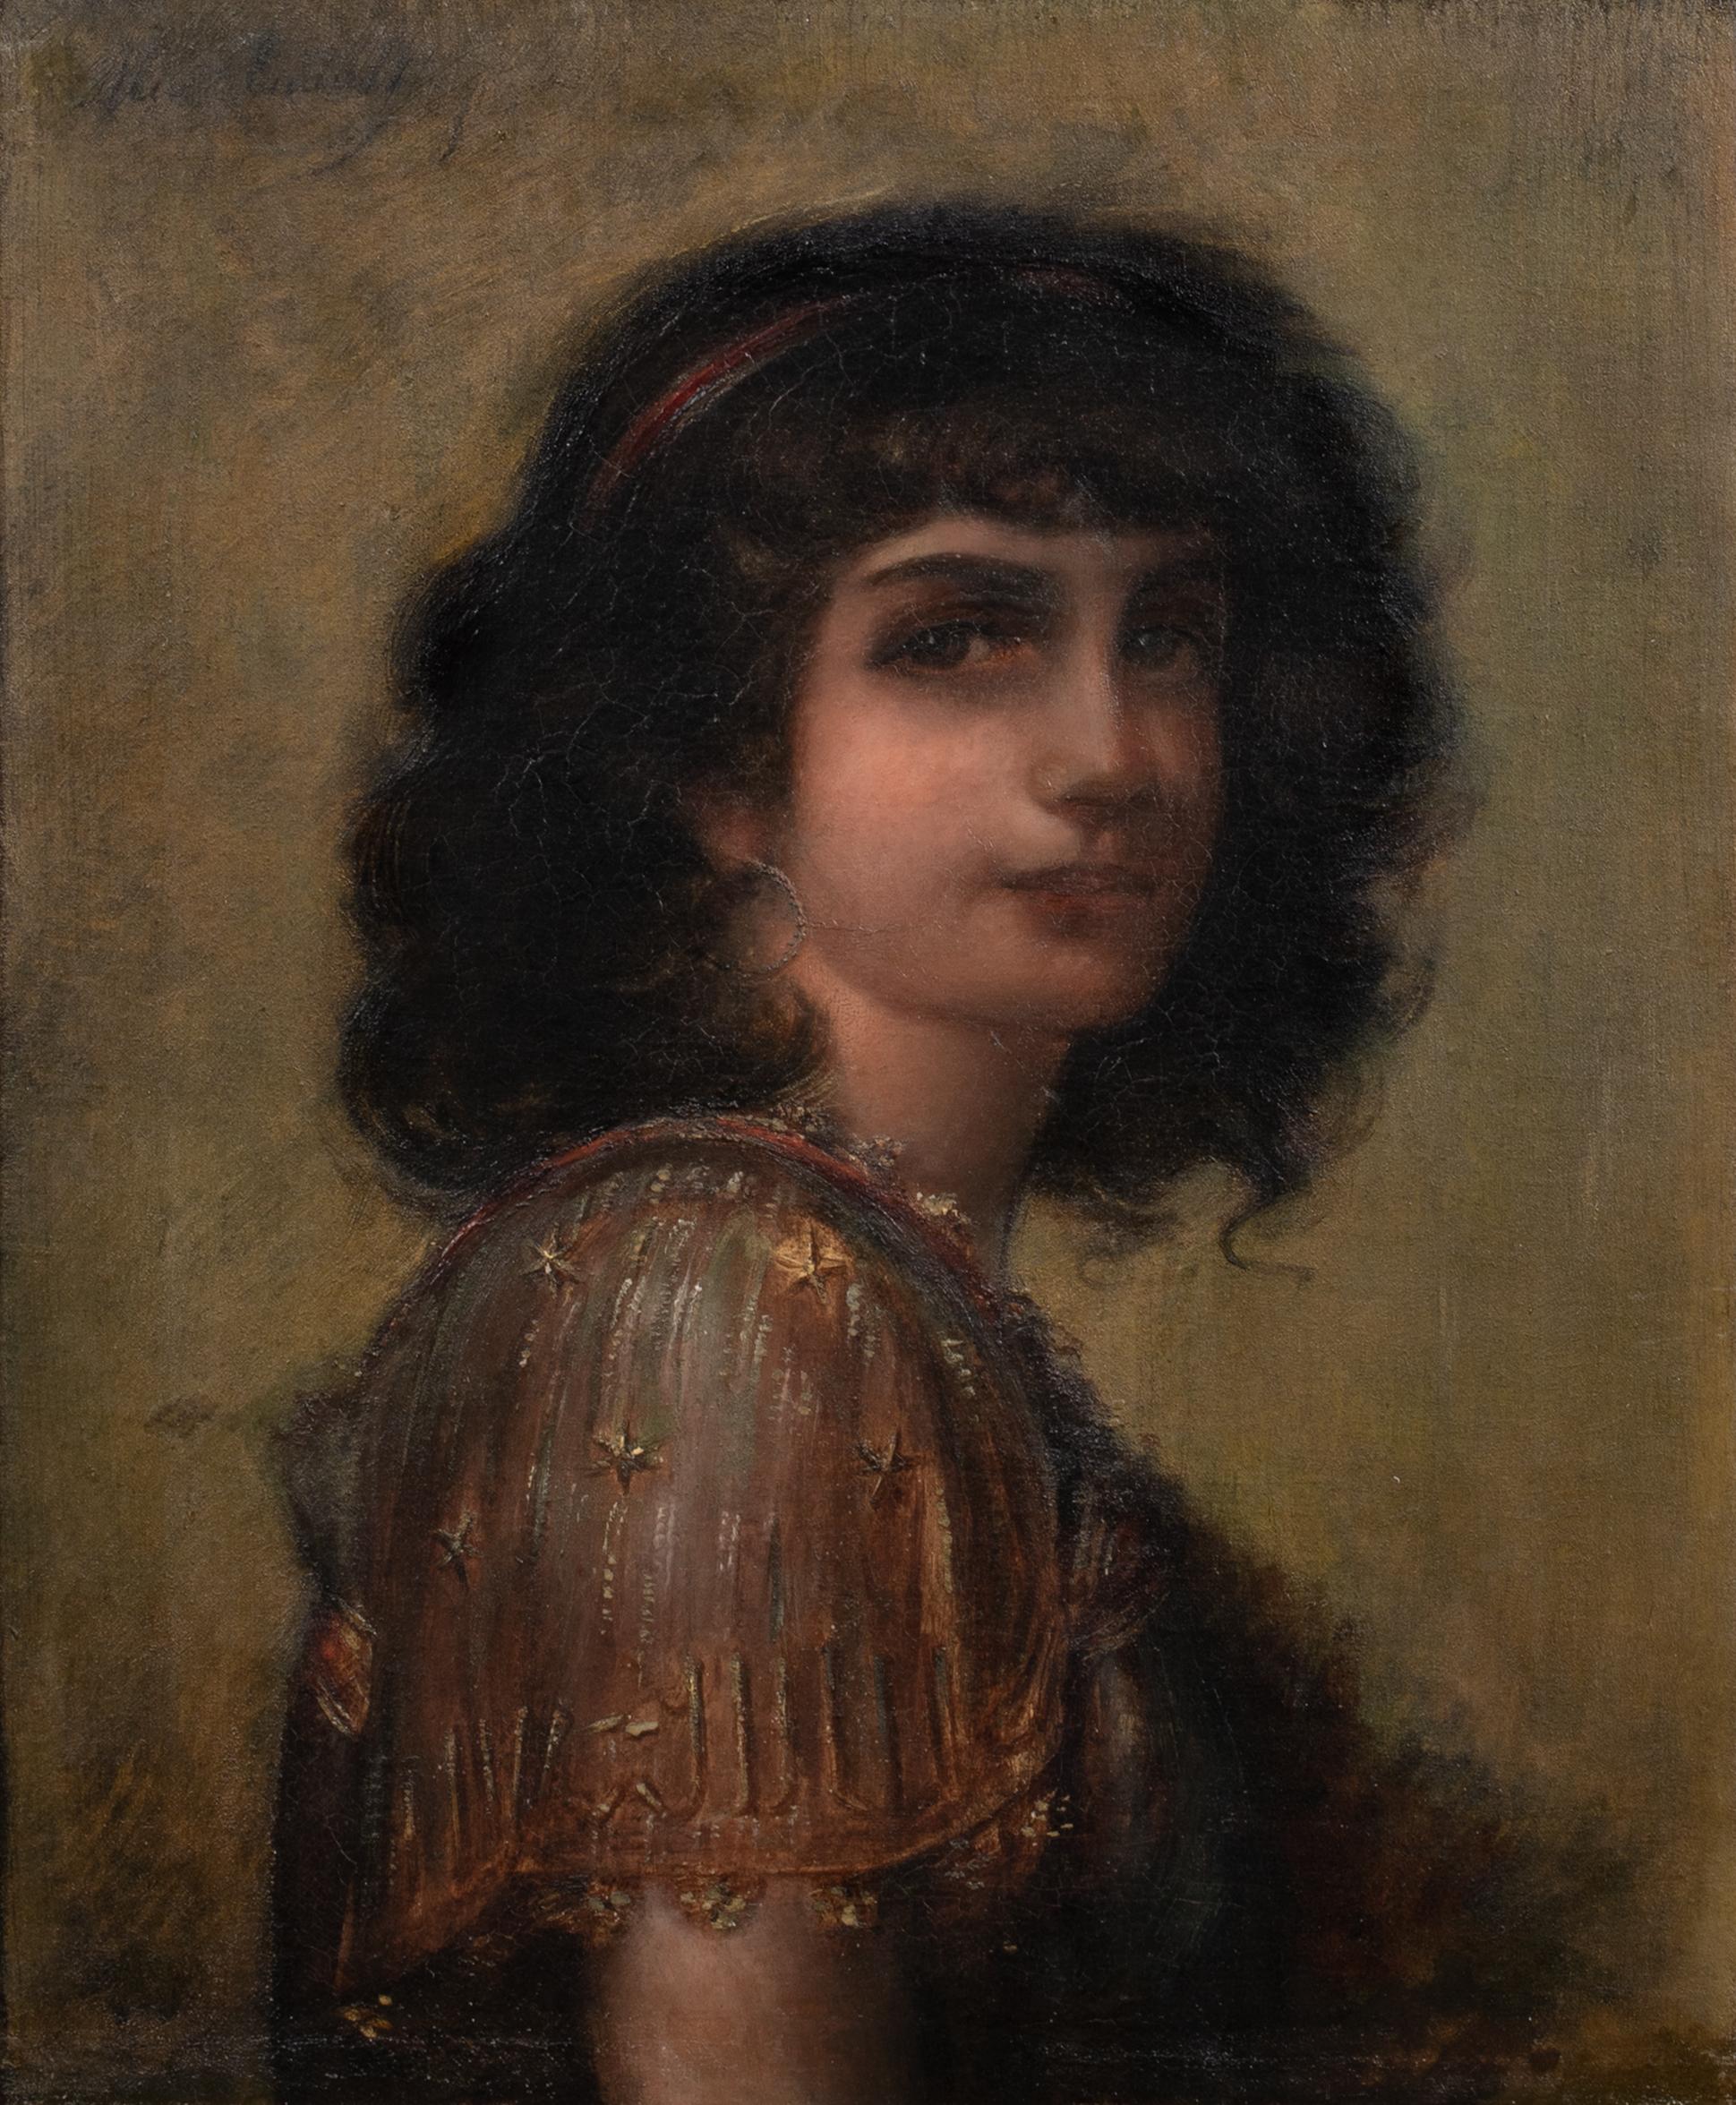 Portrait Of A Gipsy Girl, 19th Century

by Alix Louise ENAULT (1860-1913) to $40,000

Large 19th Century French portrait of a young gipsy girl, possibly portrayed as Esmeralda, oil on canvas by Alix Louise Enault. Excellent quality and condition